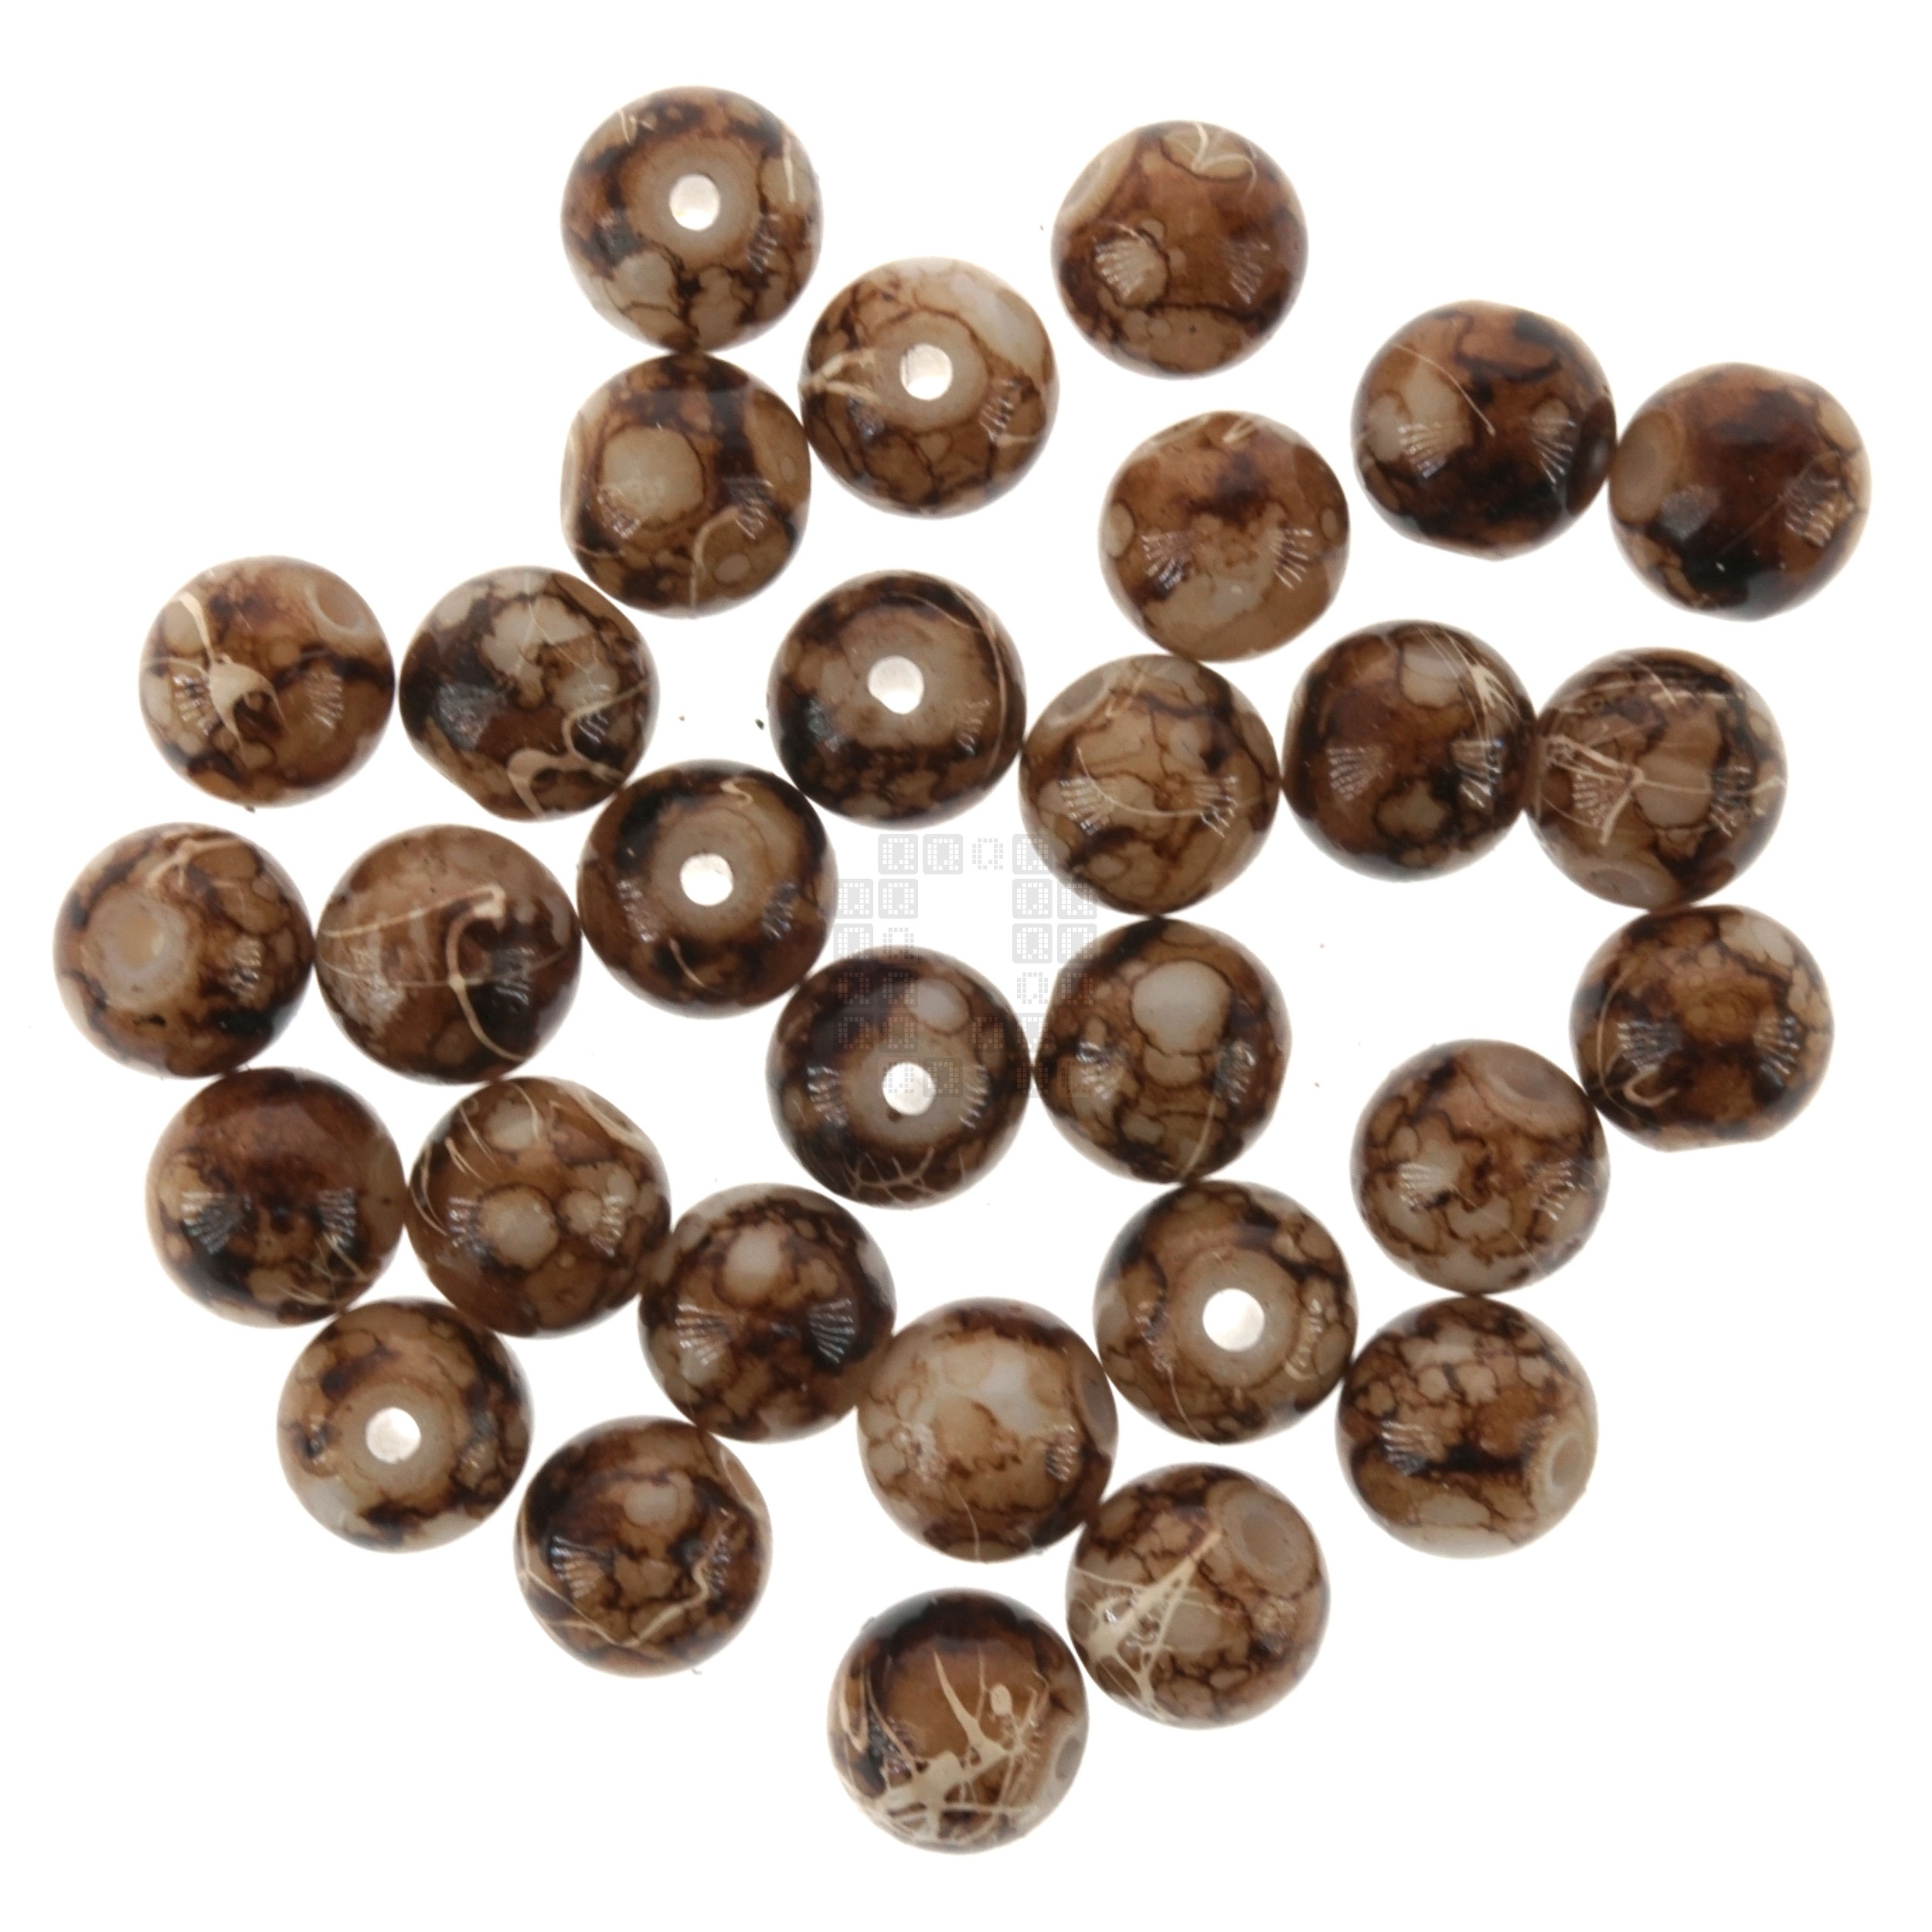 Coffee and Cream 8mm Loose Glass Beads, 30 Pieces